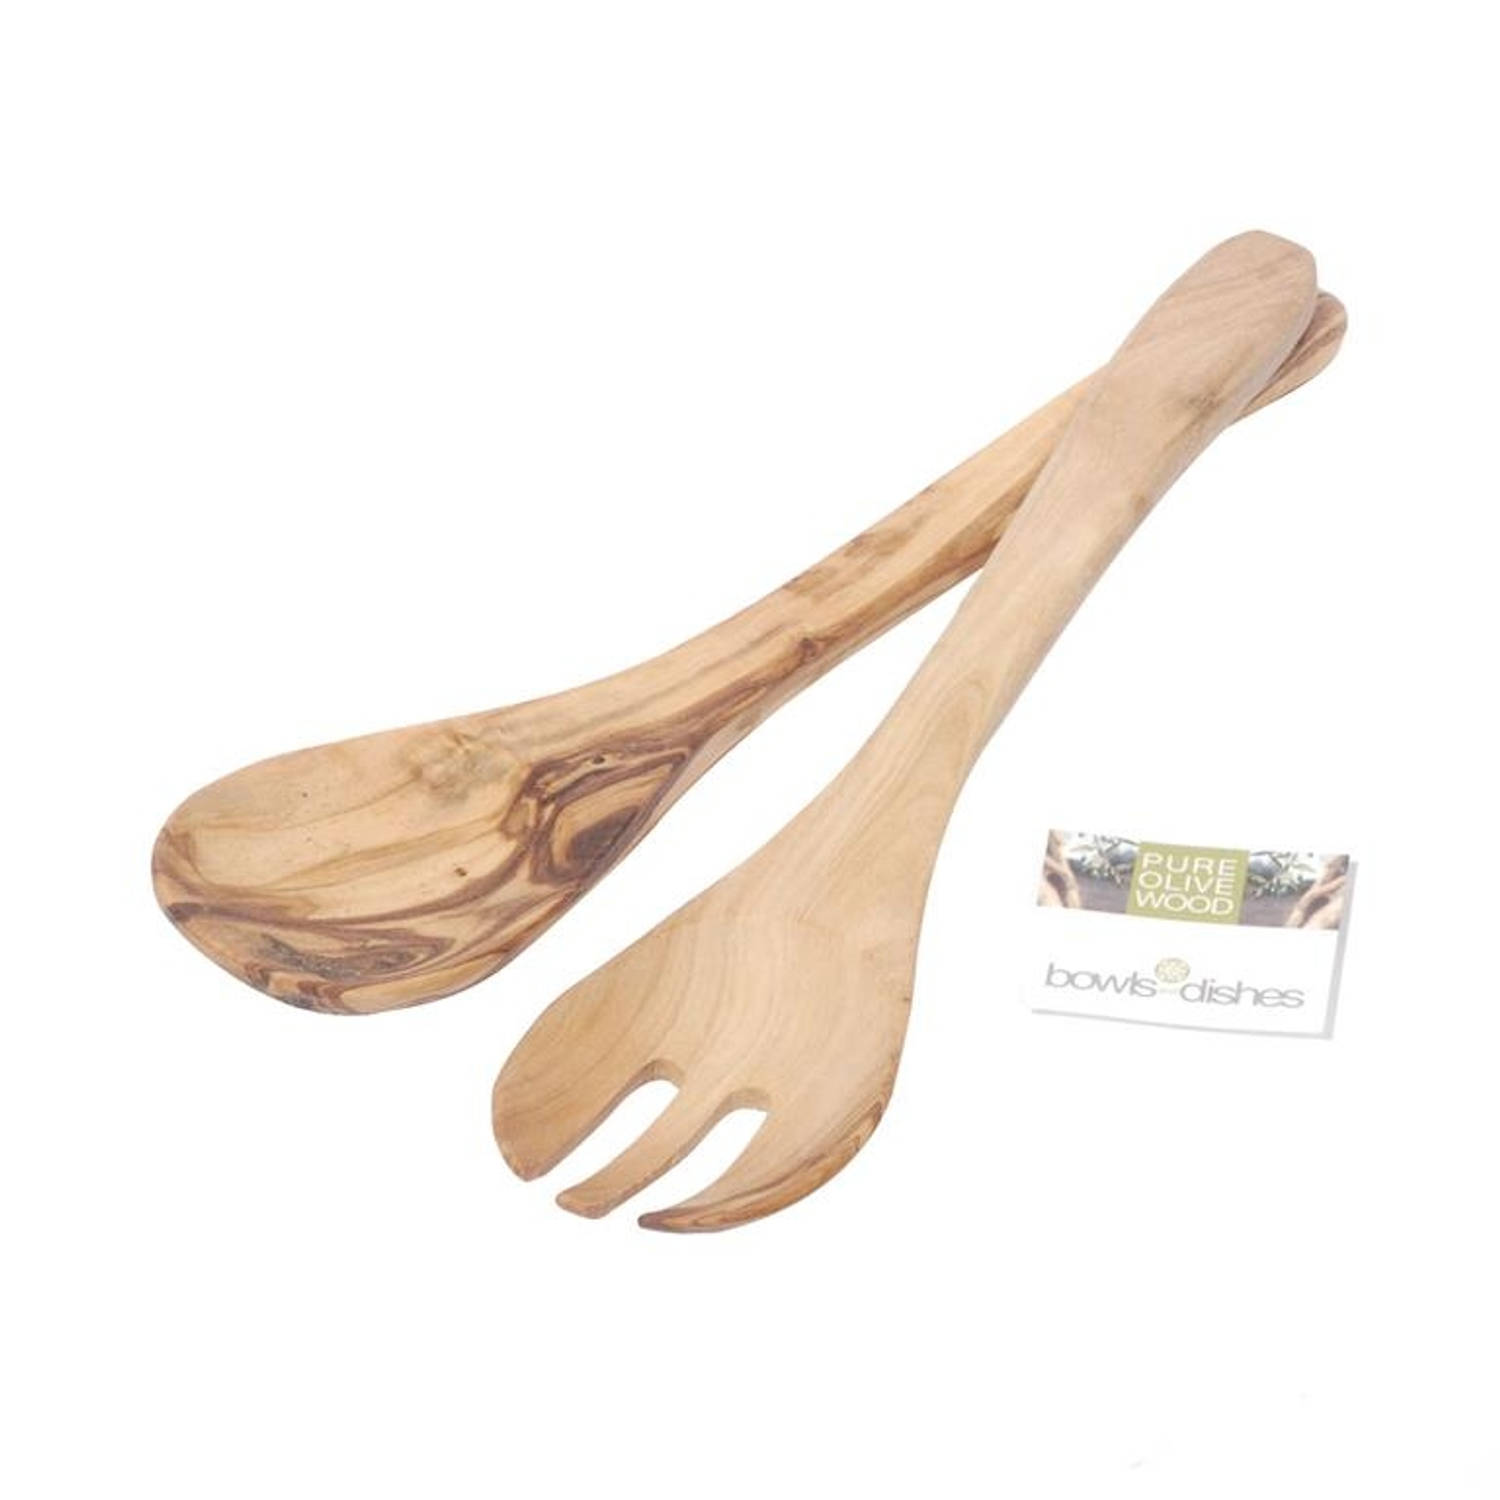 Bowls and Dishes Pure Olive Wood Saladebestek 3-tand